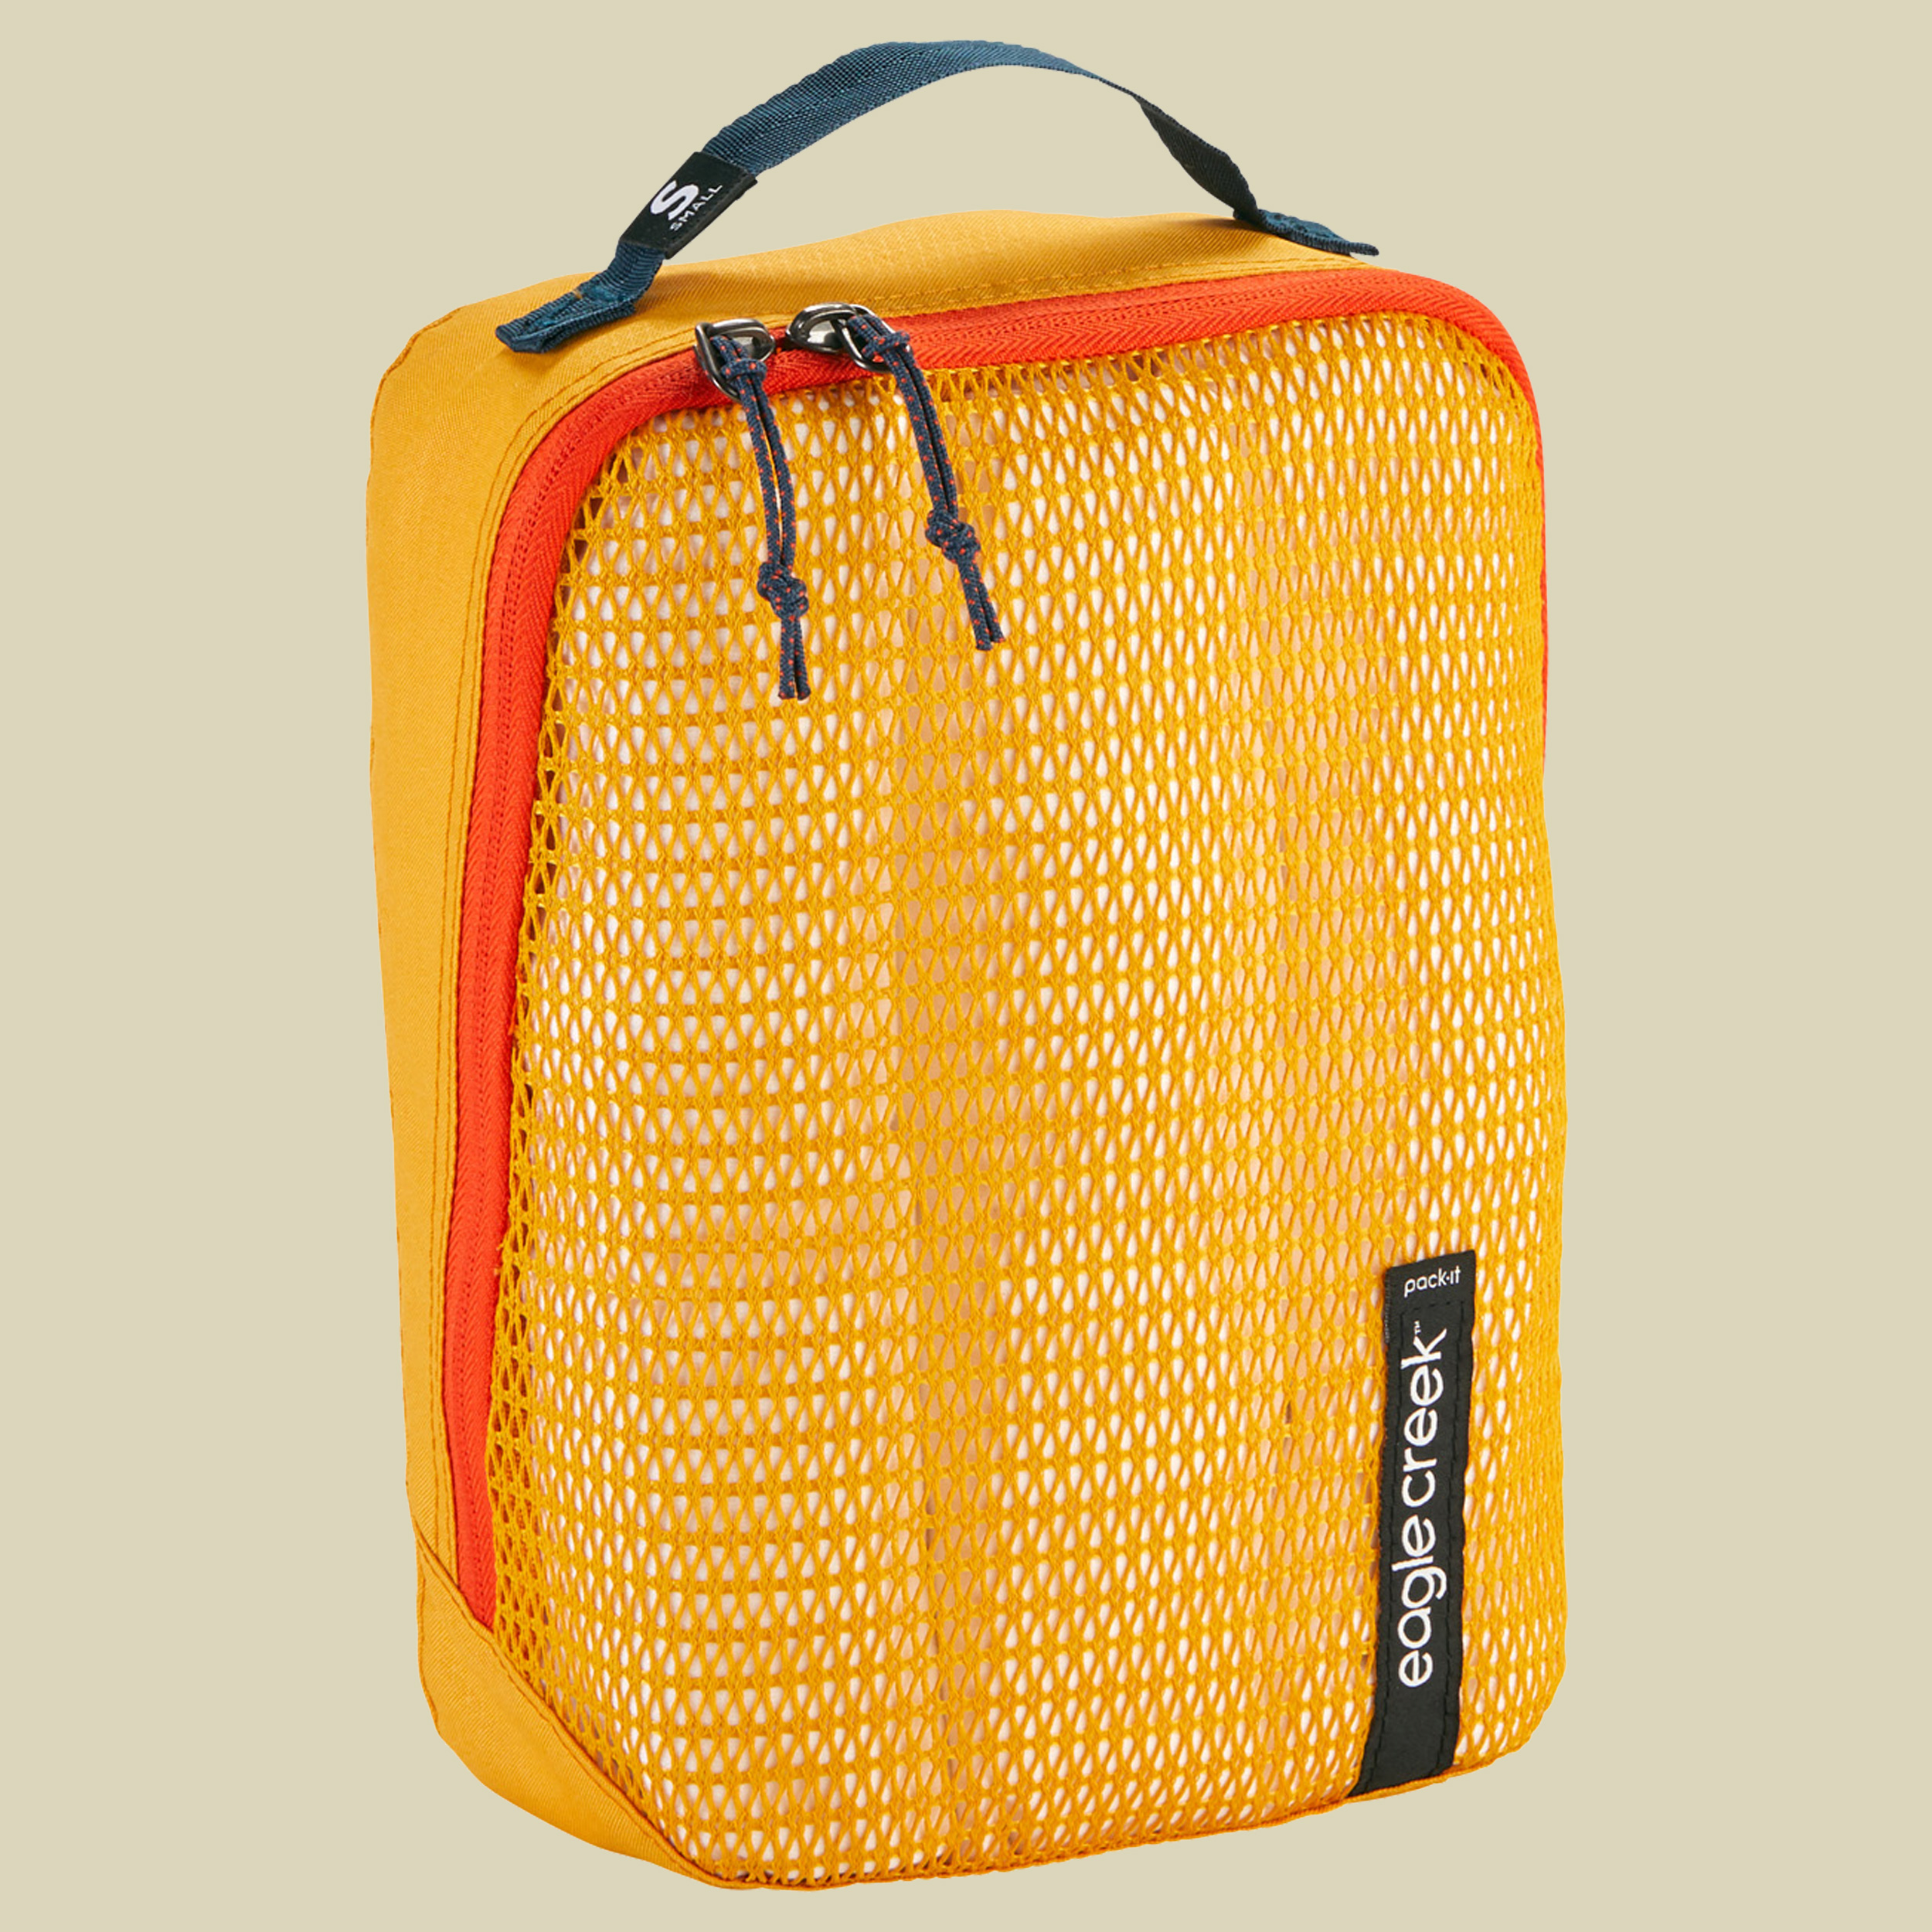 Pack-It Reveal Cube S Farbe sahara yellow